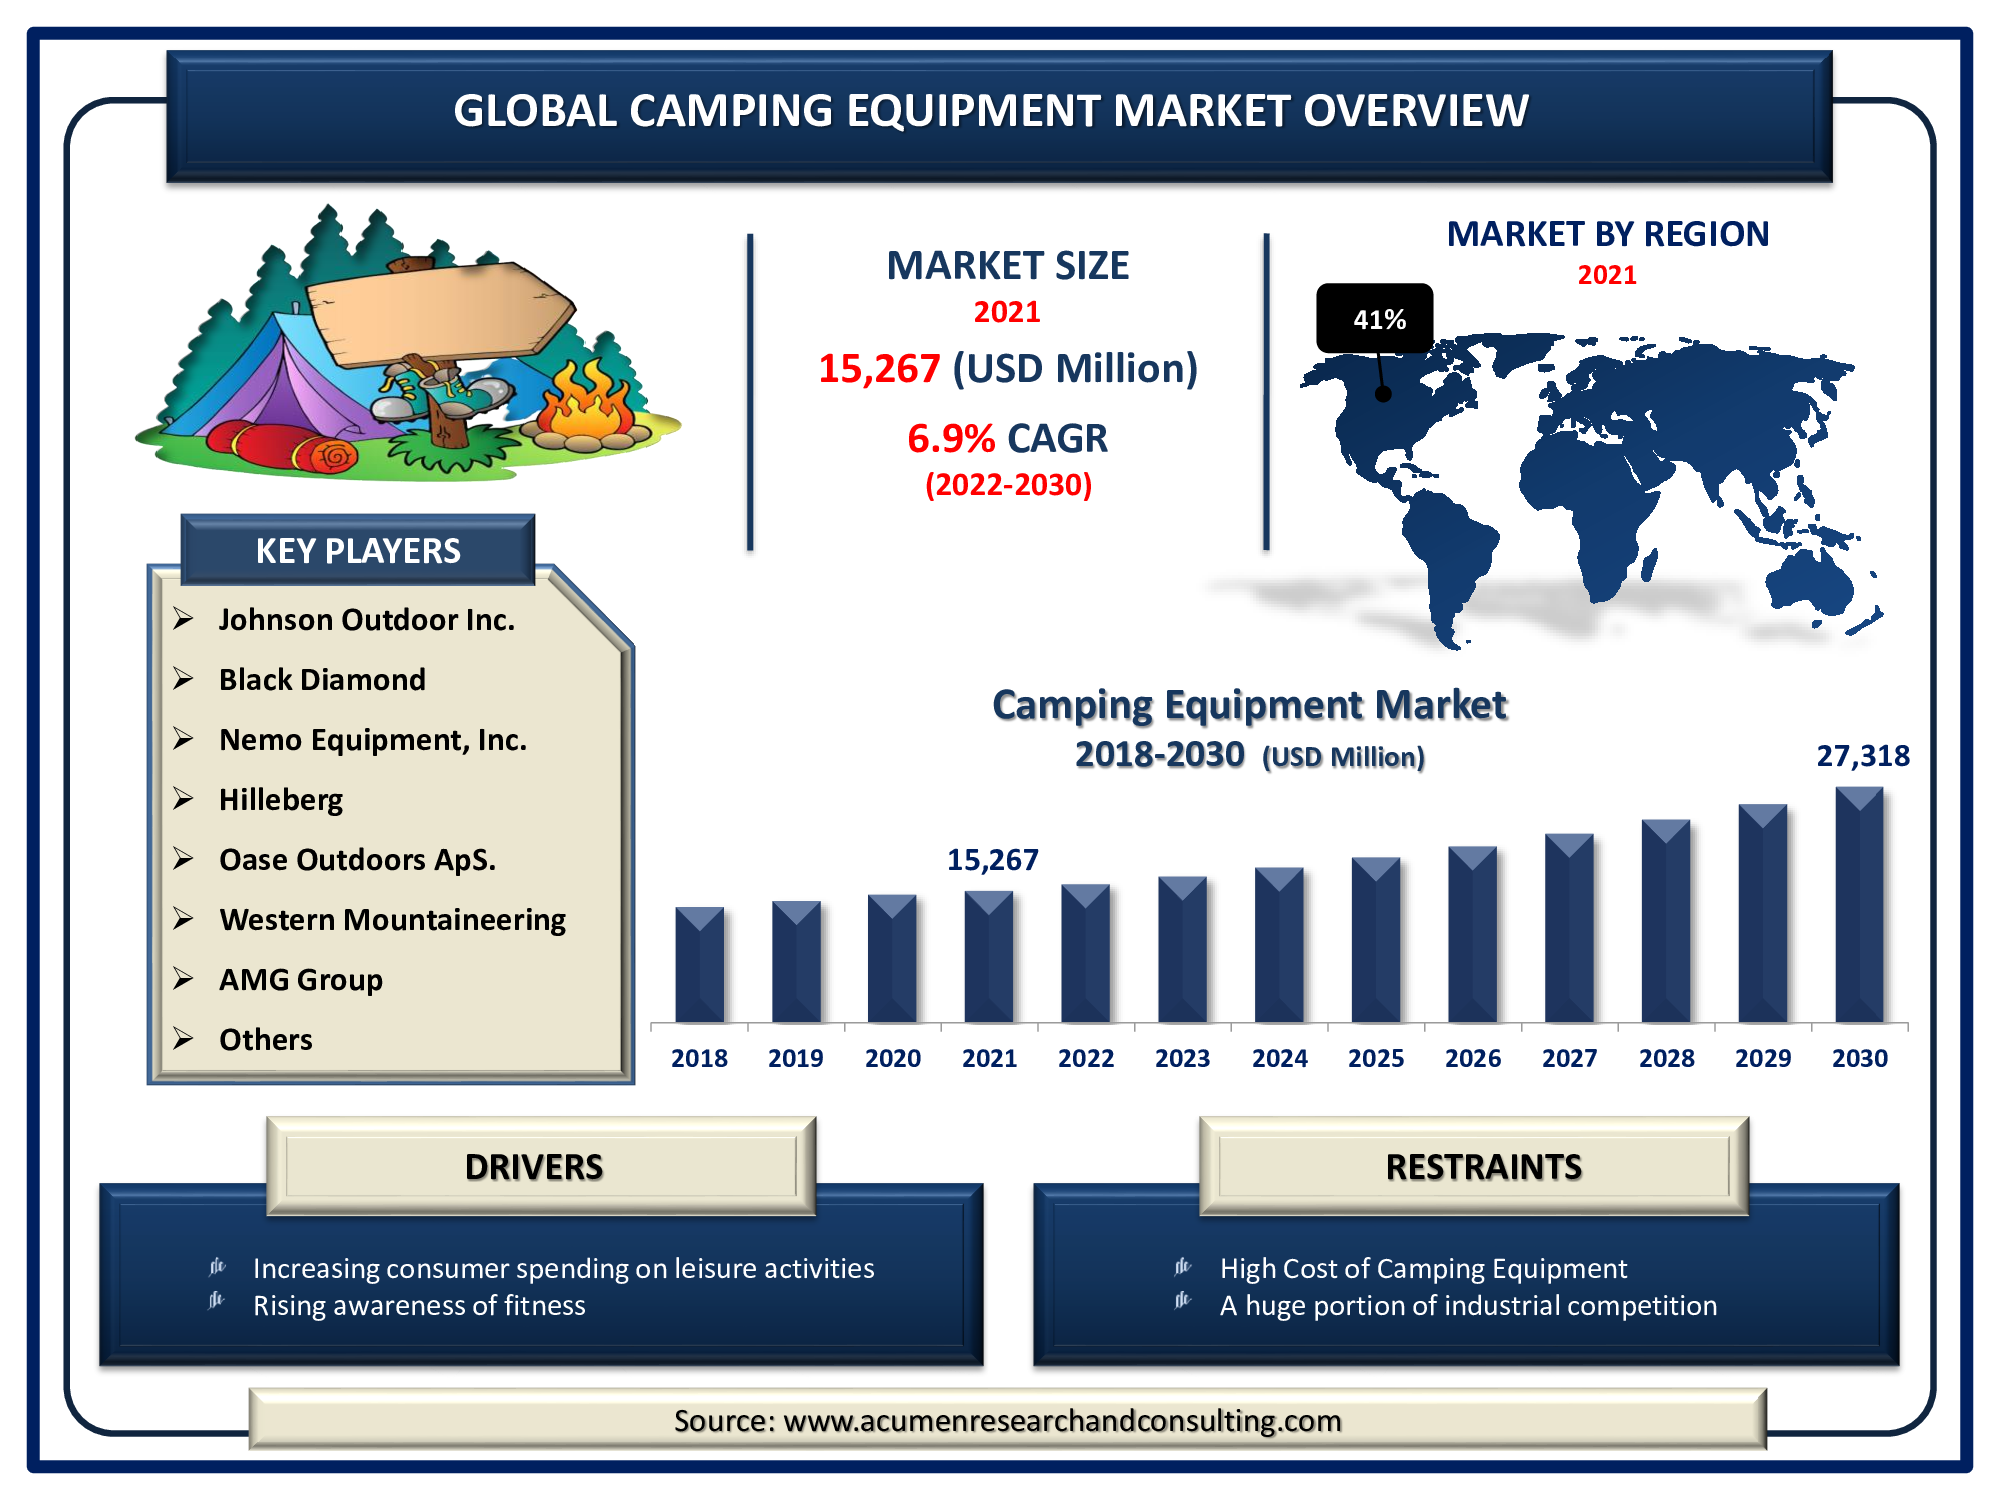 Camping Equipment Market Size was valued at USD 15,267 Million in 2021 and is predicted to be worth USD 27,318 Million by 2030, with a CAGR of 6.9% from 2022 to 2030.